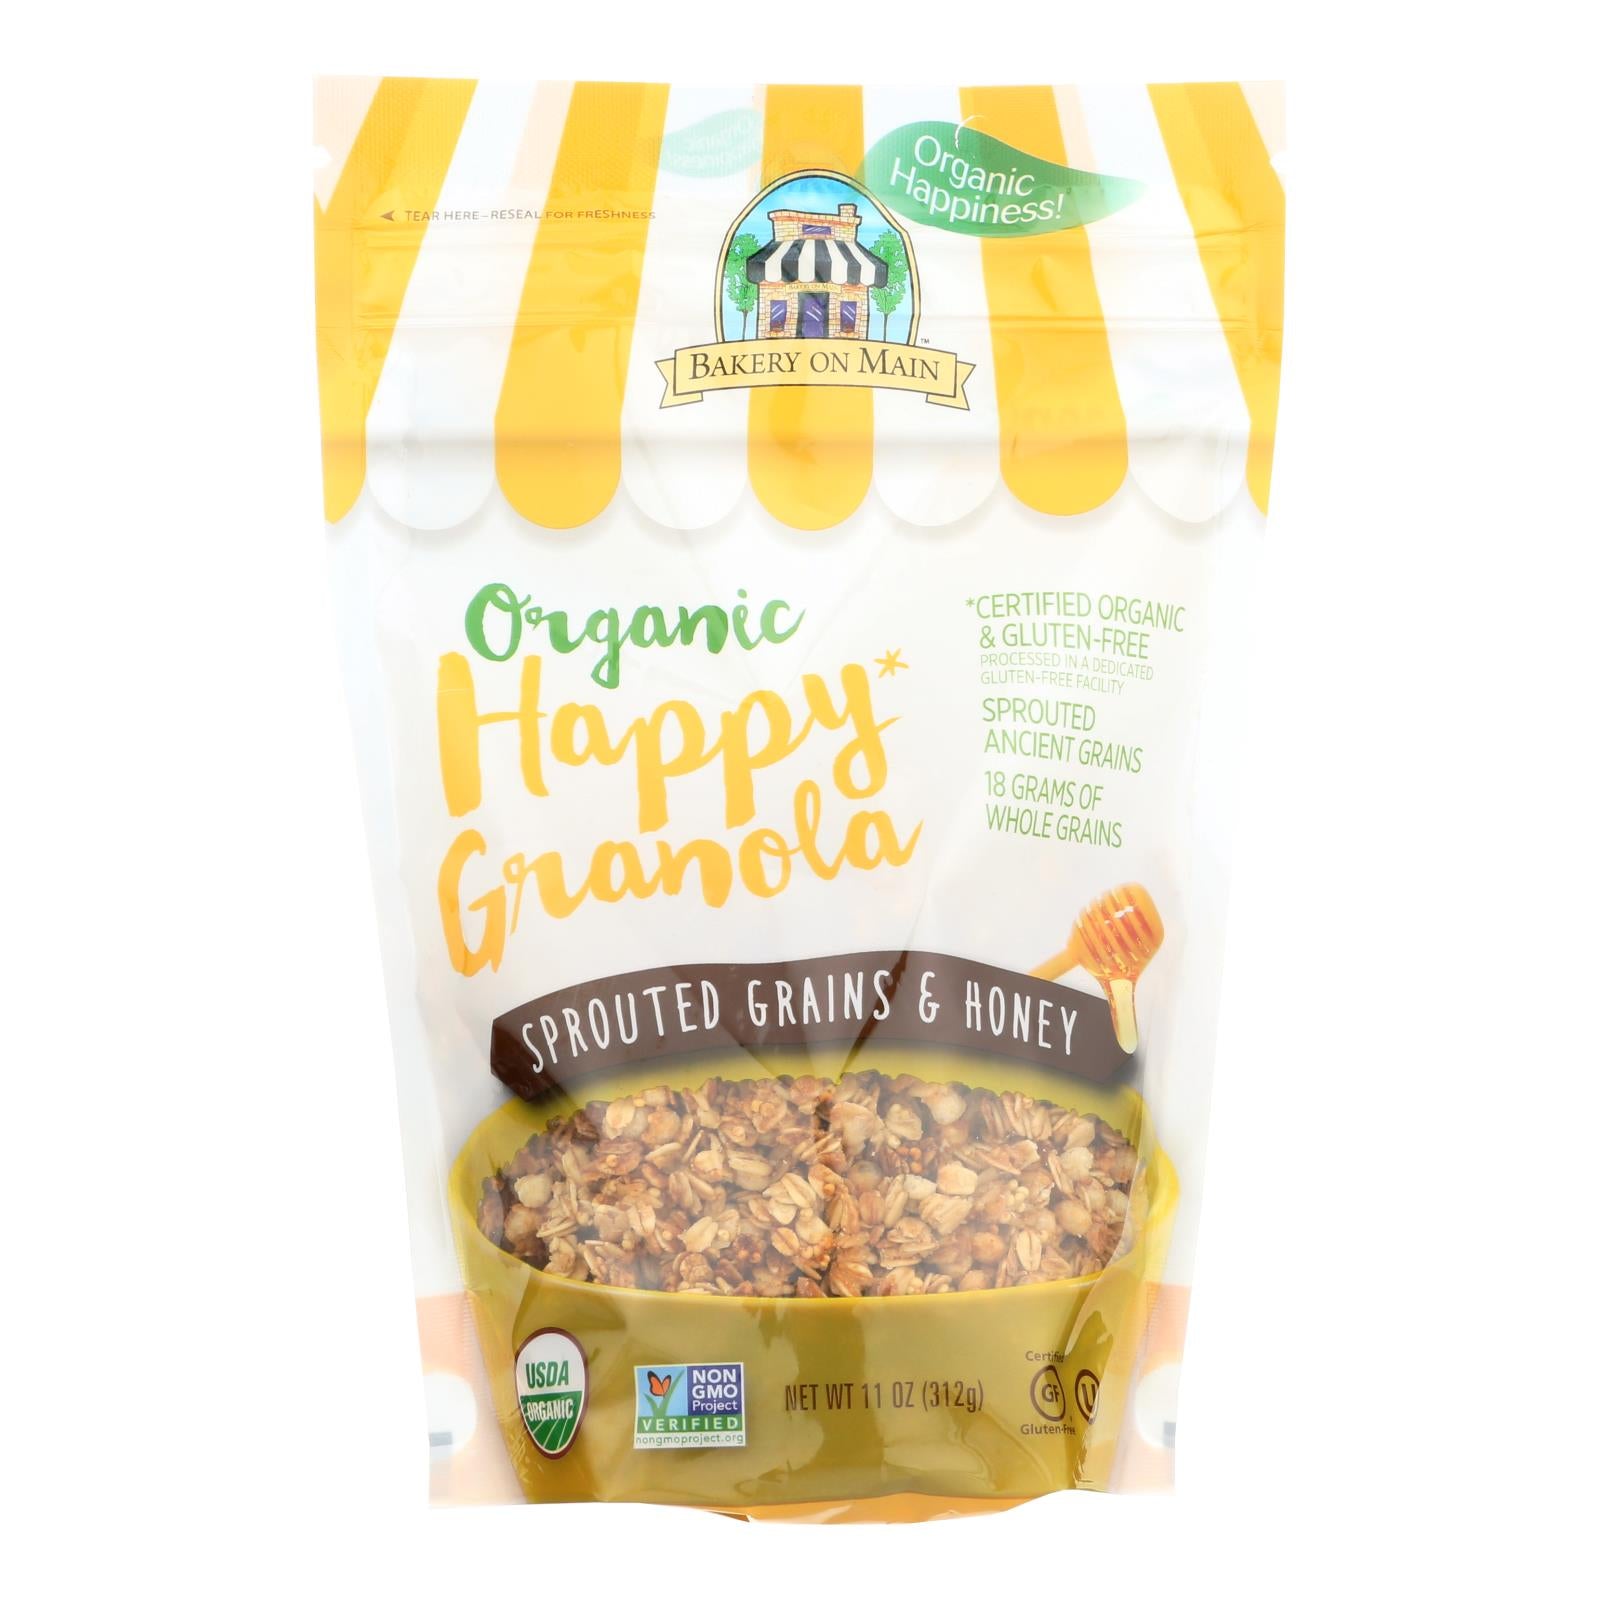 Bakery On Main, Bakery On Main Organic Happy Granola - Sprouted Grains & Honey - Case of 6 - 11 oz (Pack of 6)